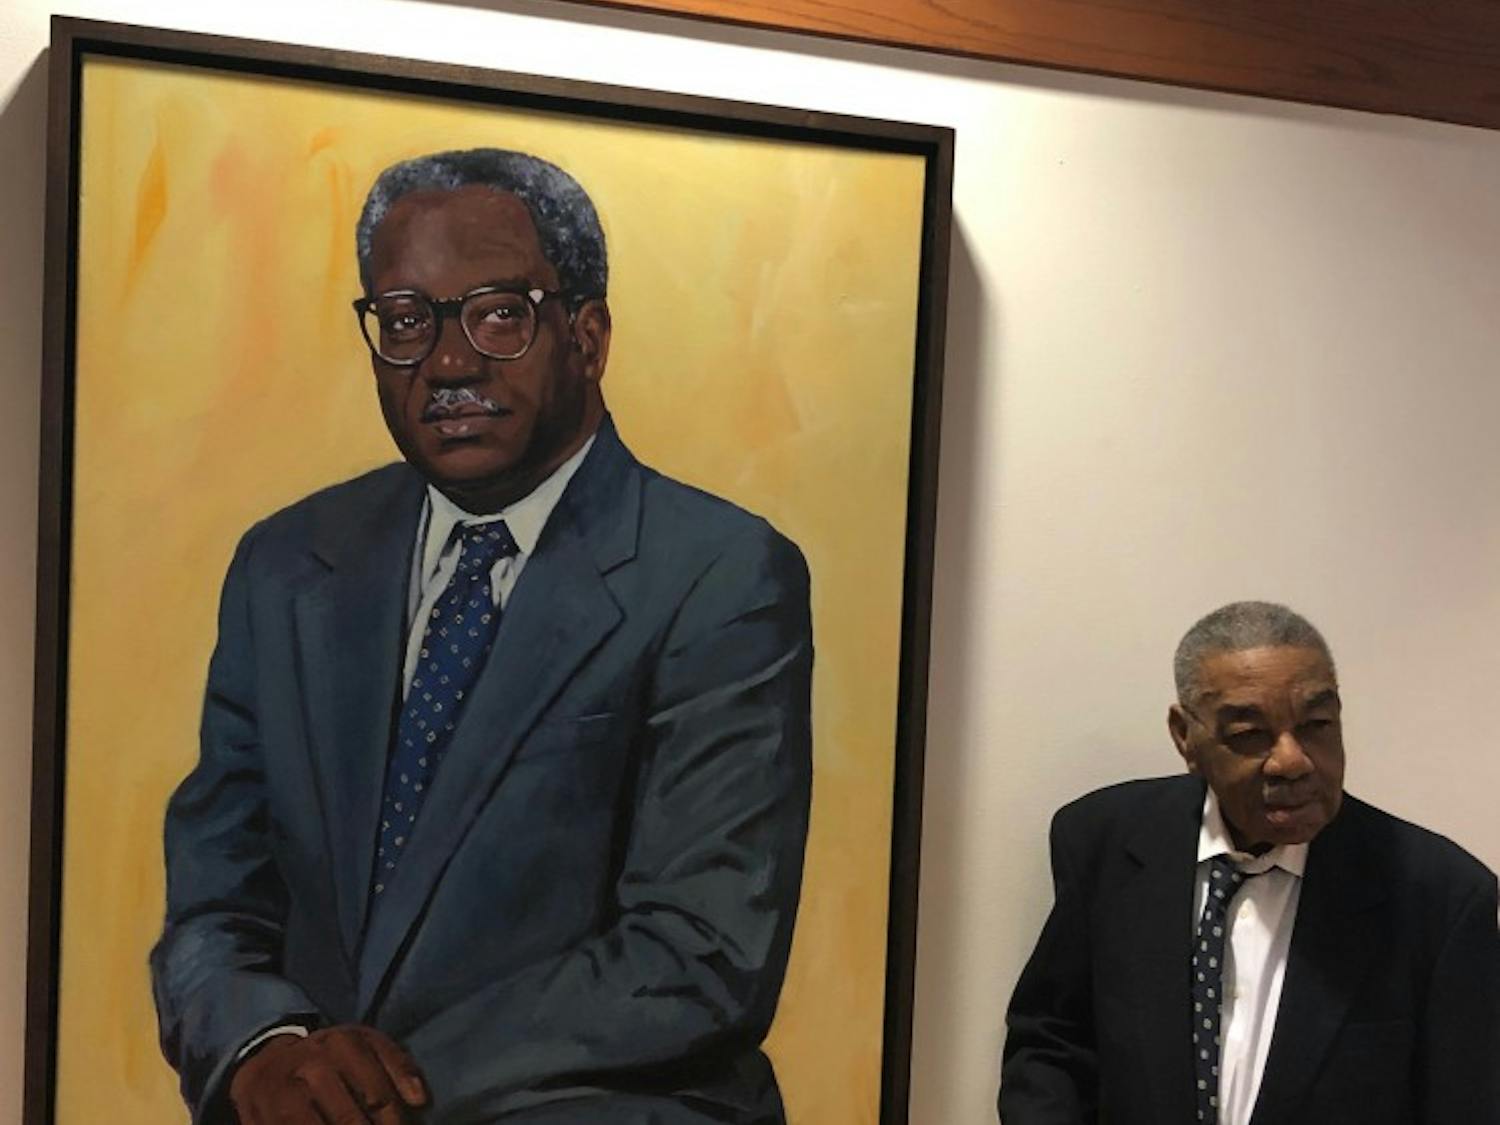 A portrait of Julius Chambers, a civil rights leader, was unveiled at the School of Law on Tuesday. 